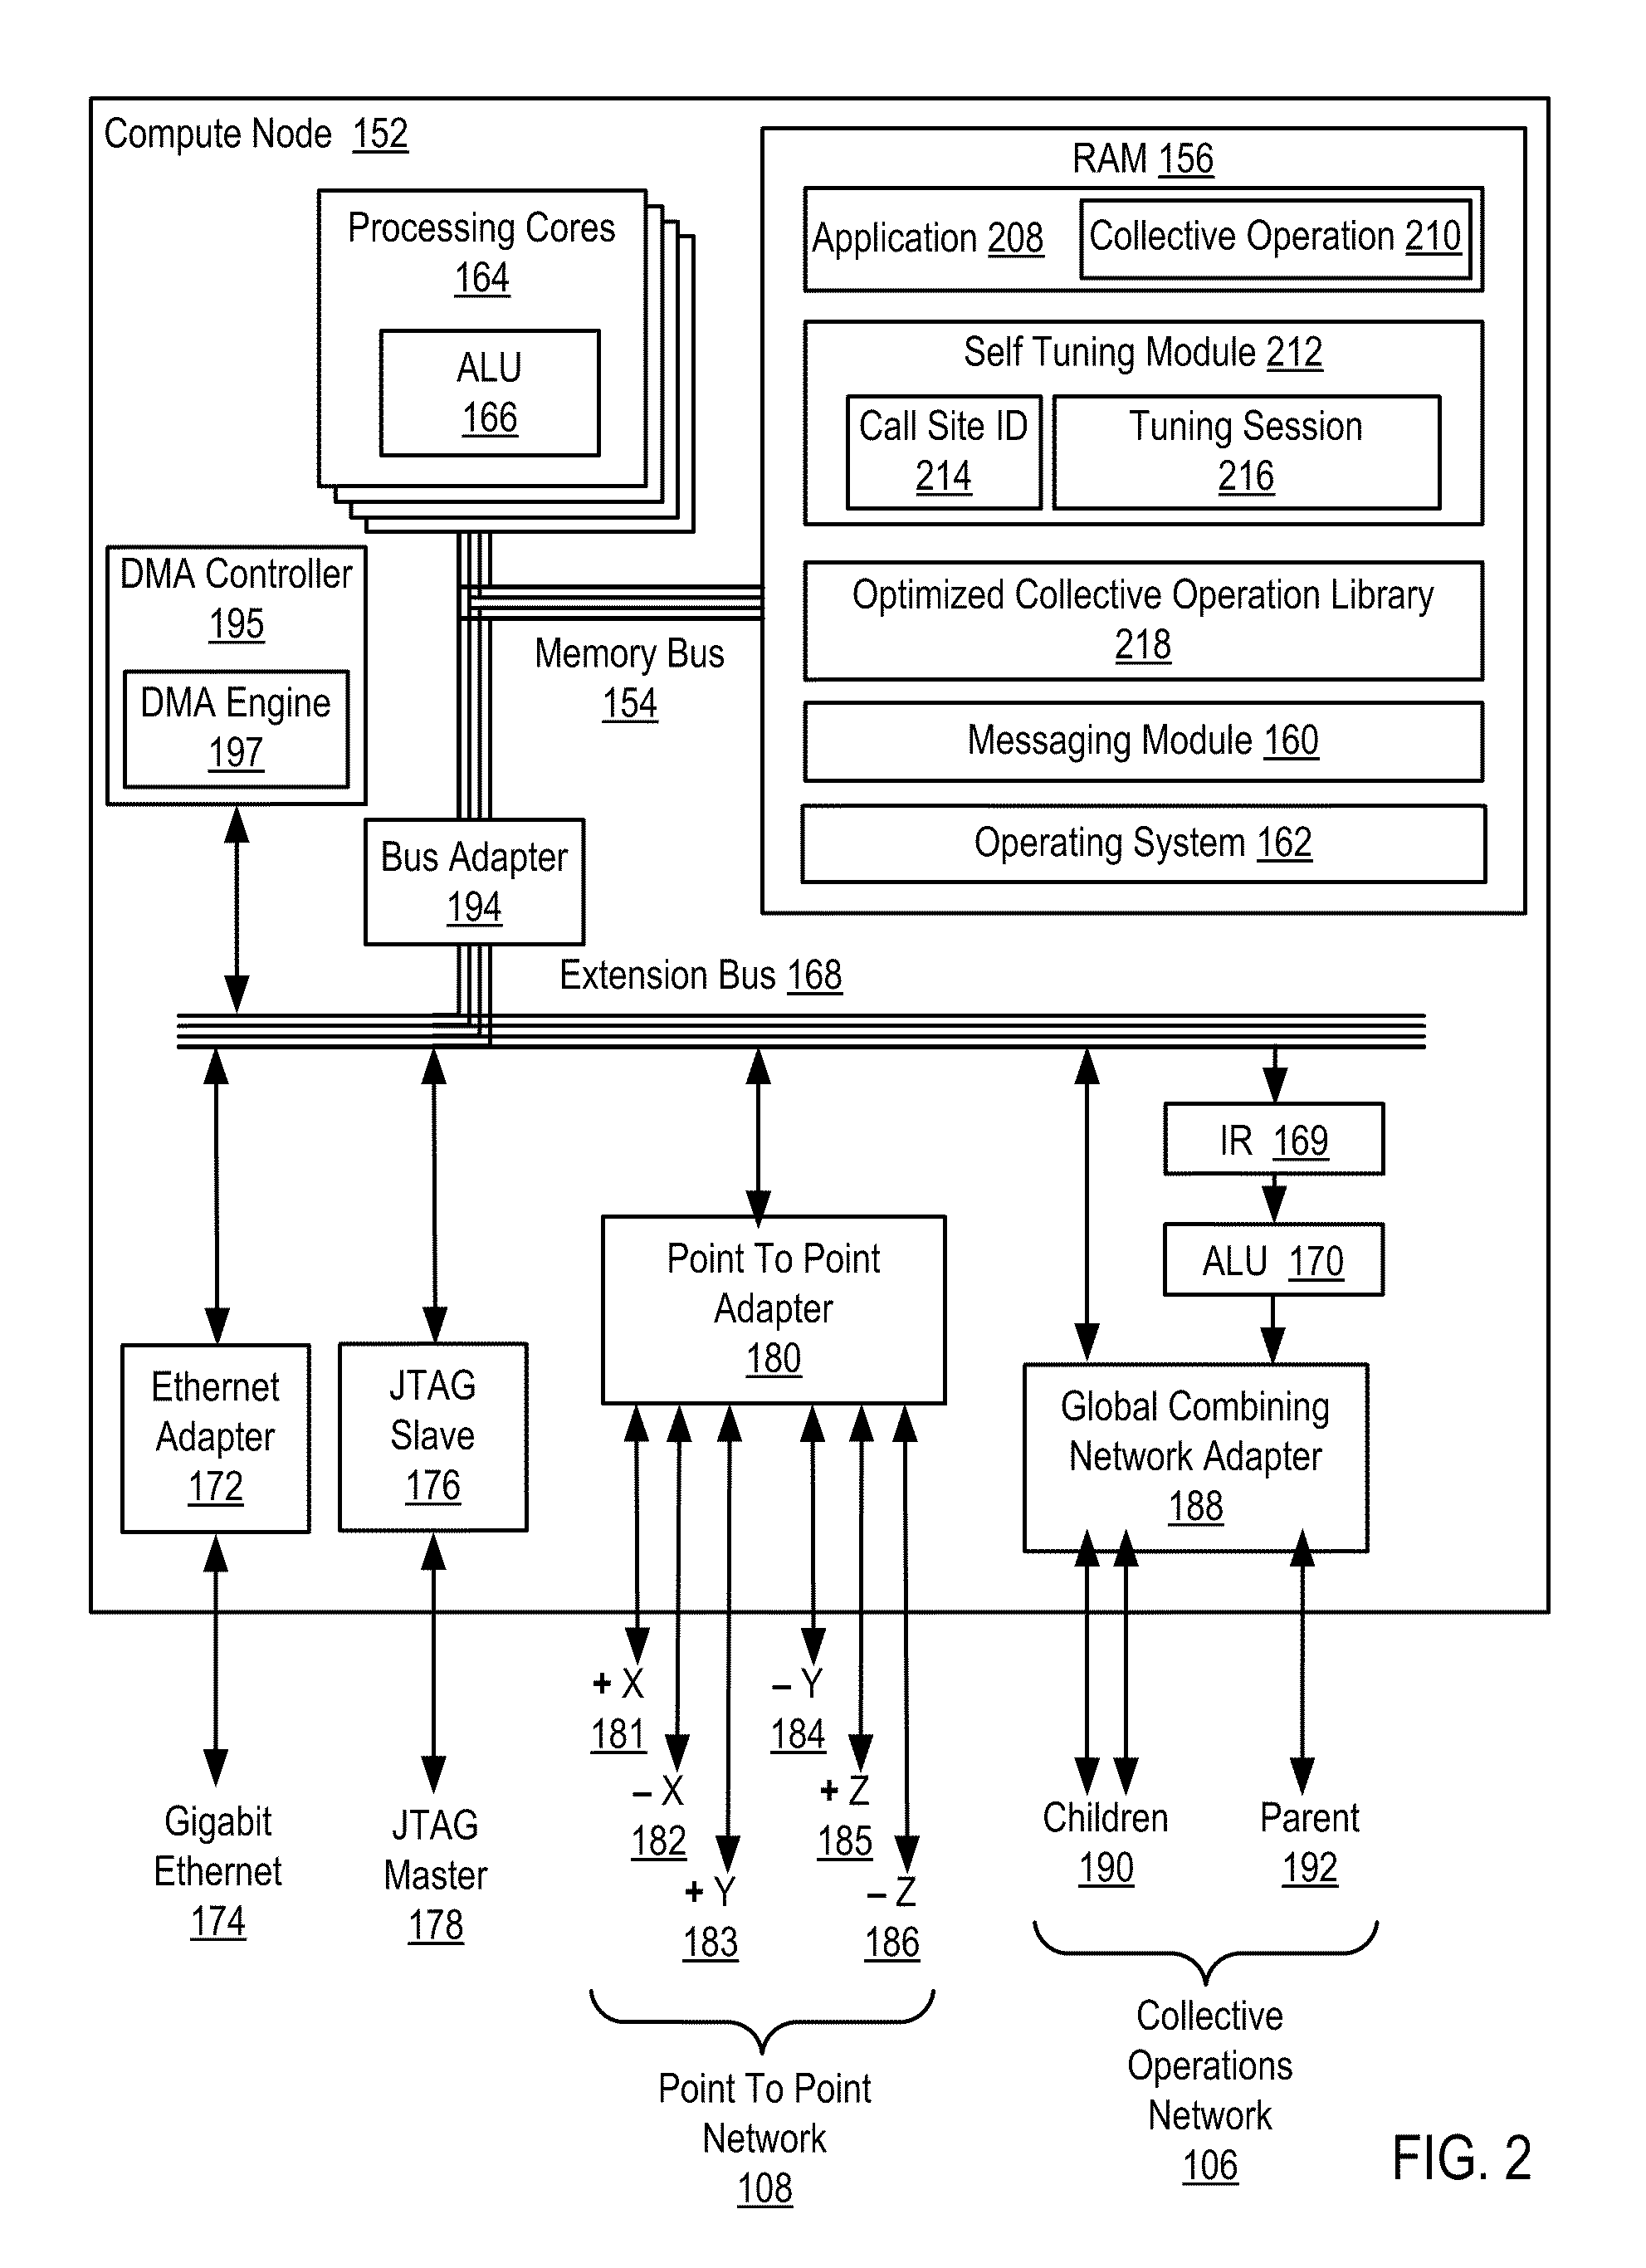 Runtime Optimization Of An Application Executing On A Parallel Computer